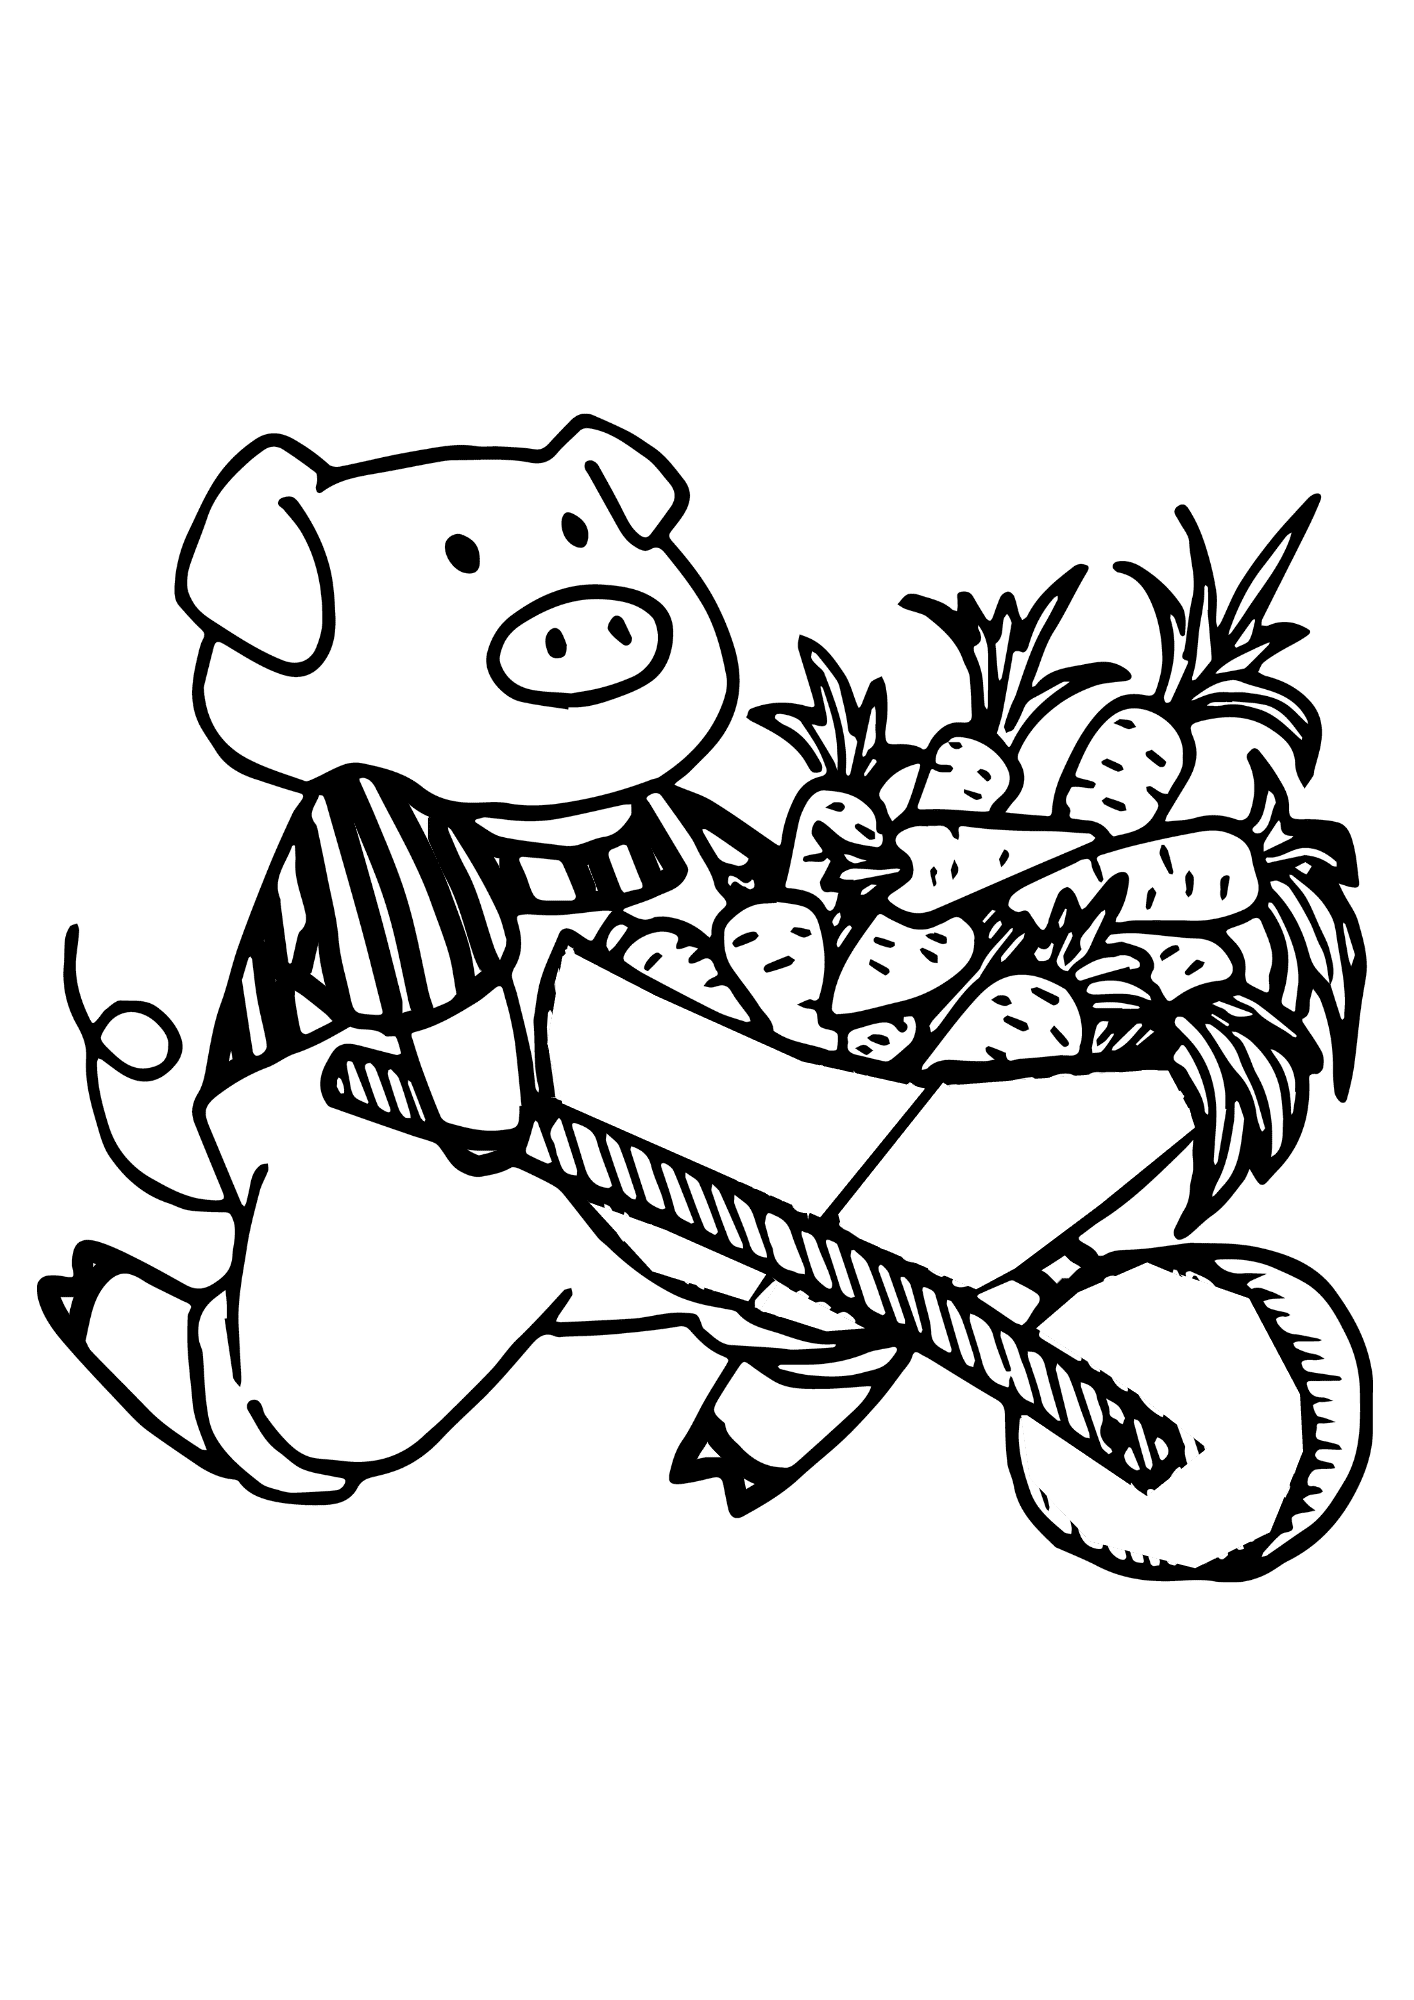 Draw A Pig Coloring Page